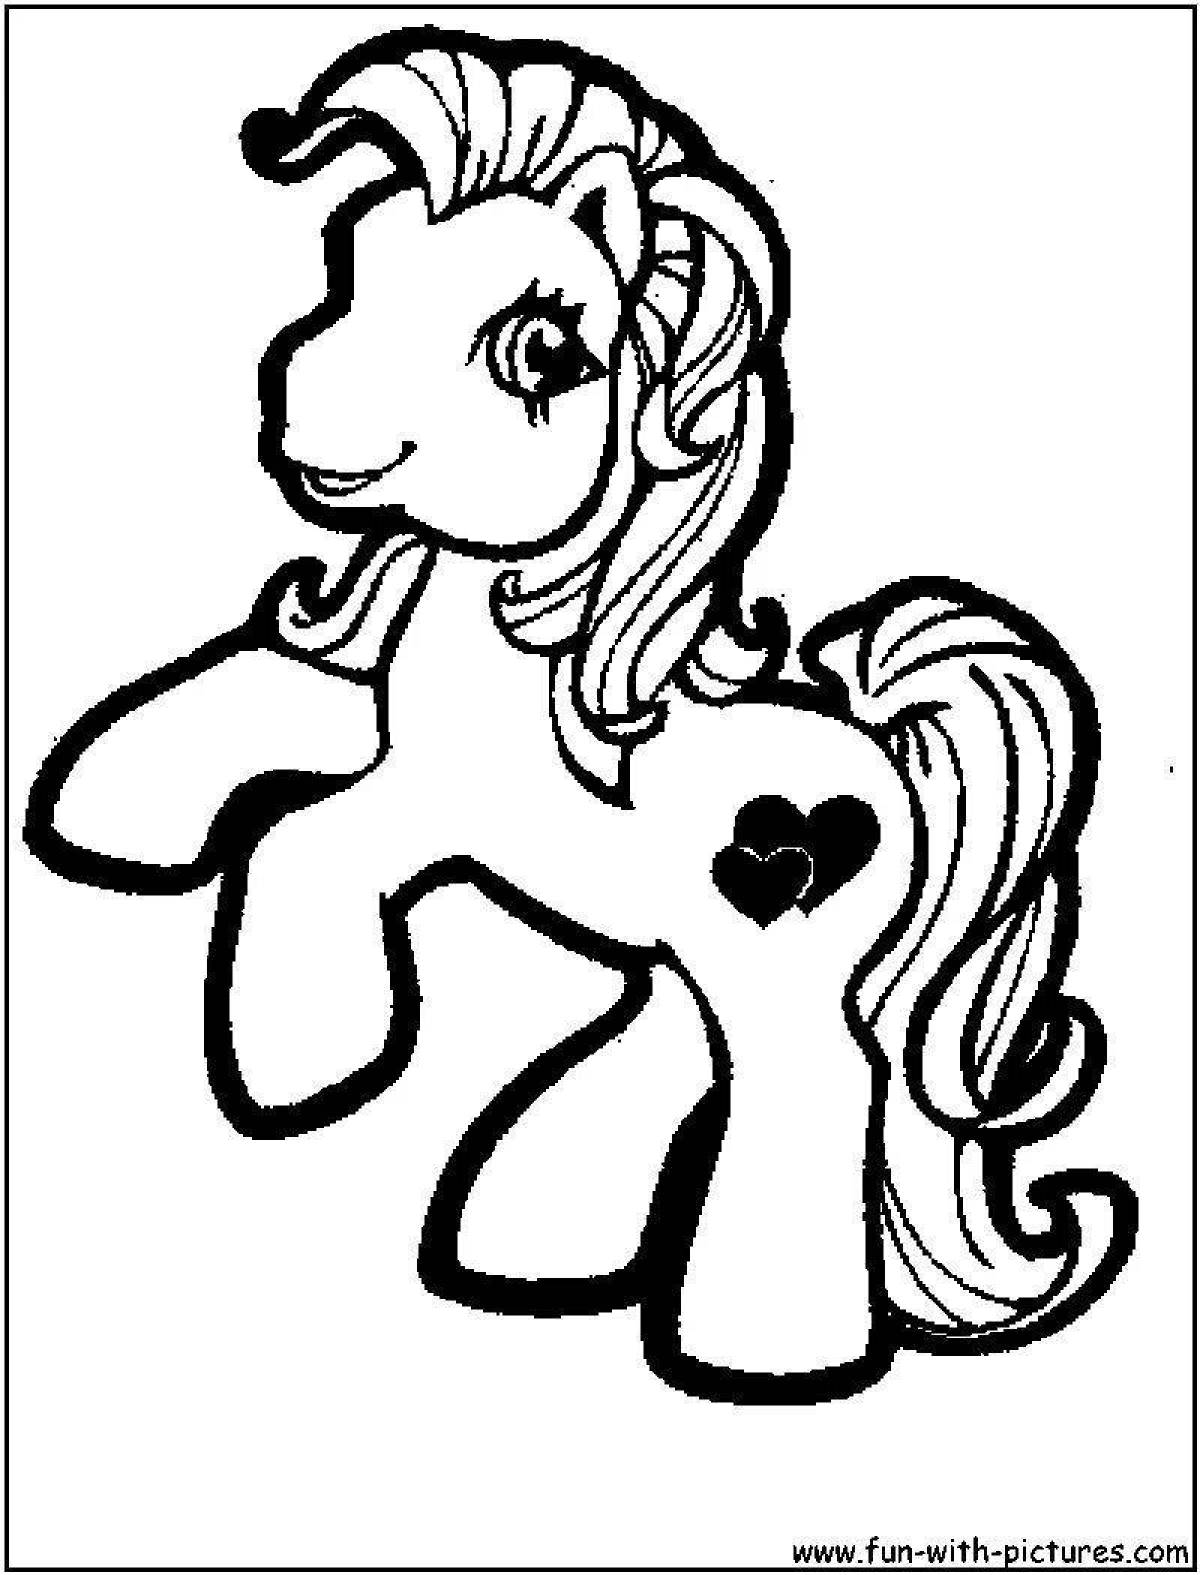 Exciting horse coloring pages